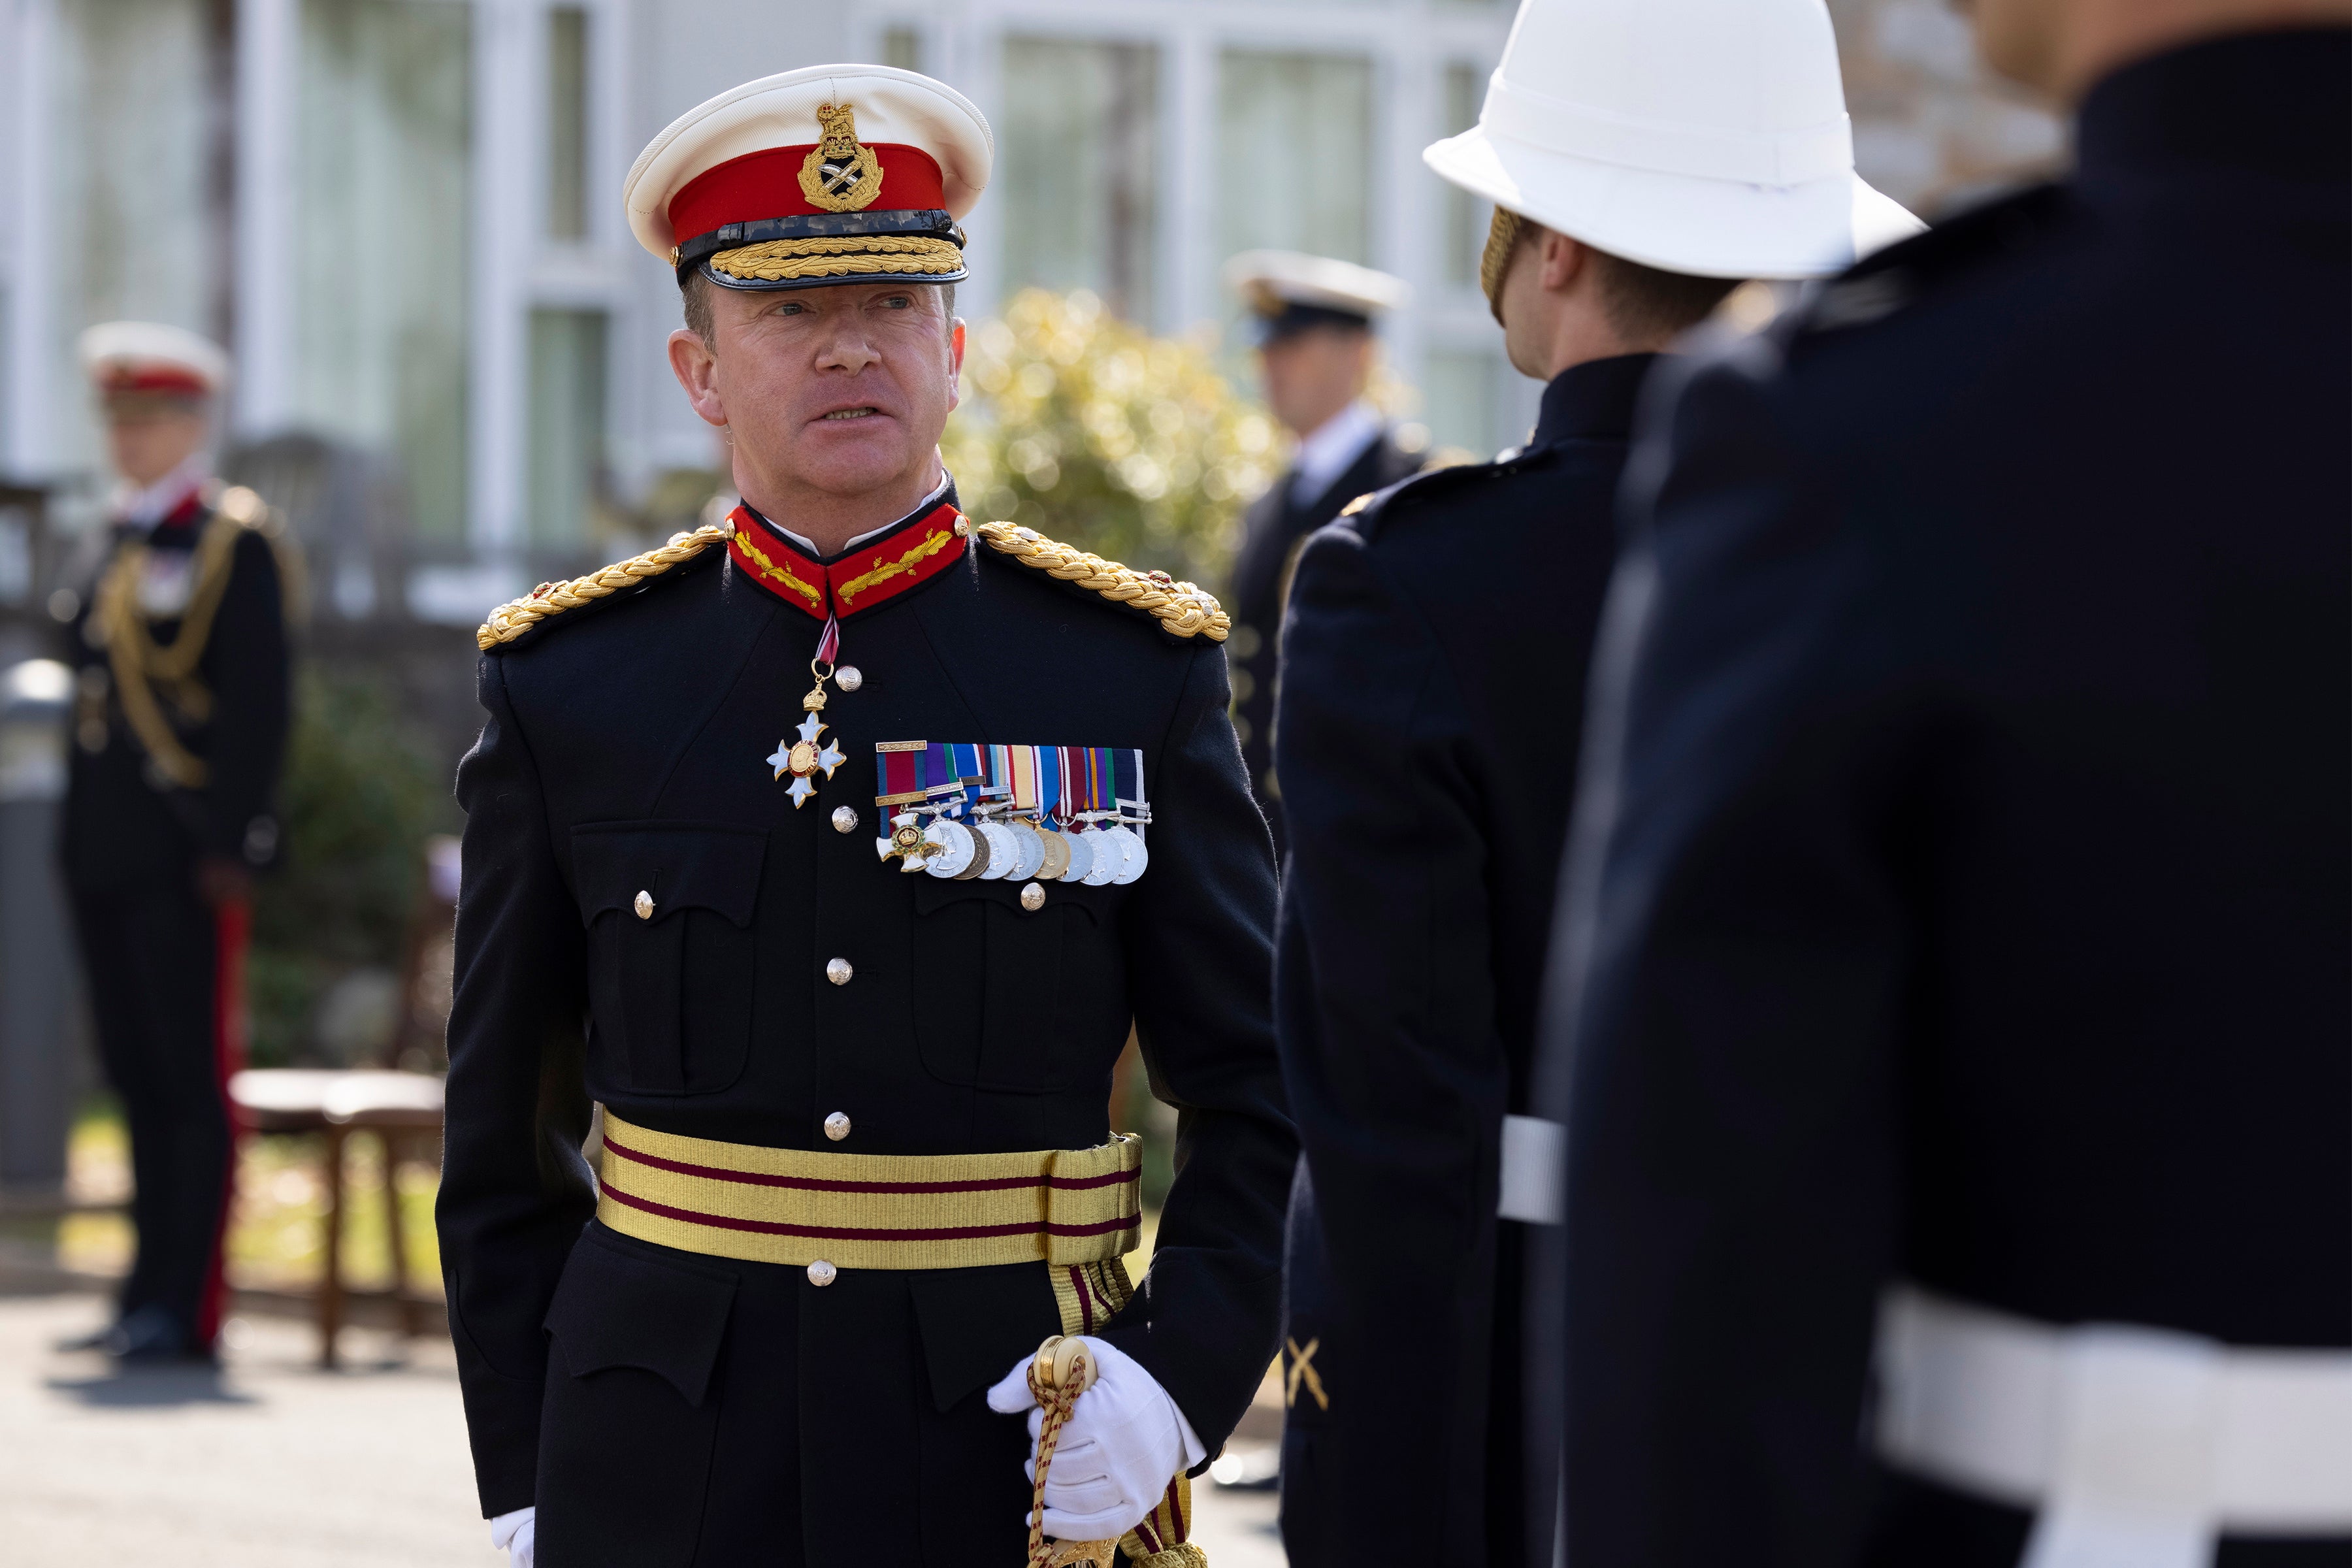 Major General Matthew Holmes was Commandant General up until April this year